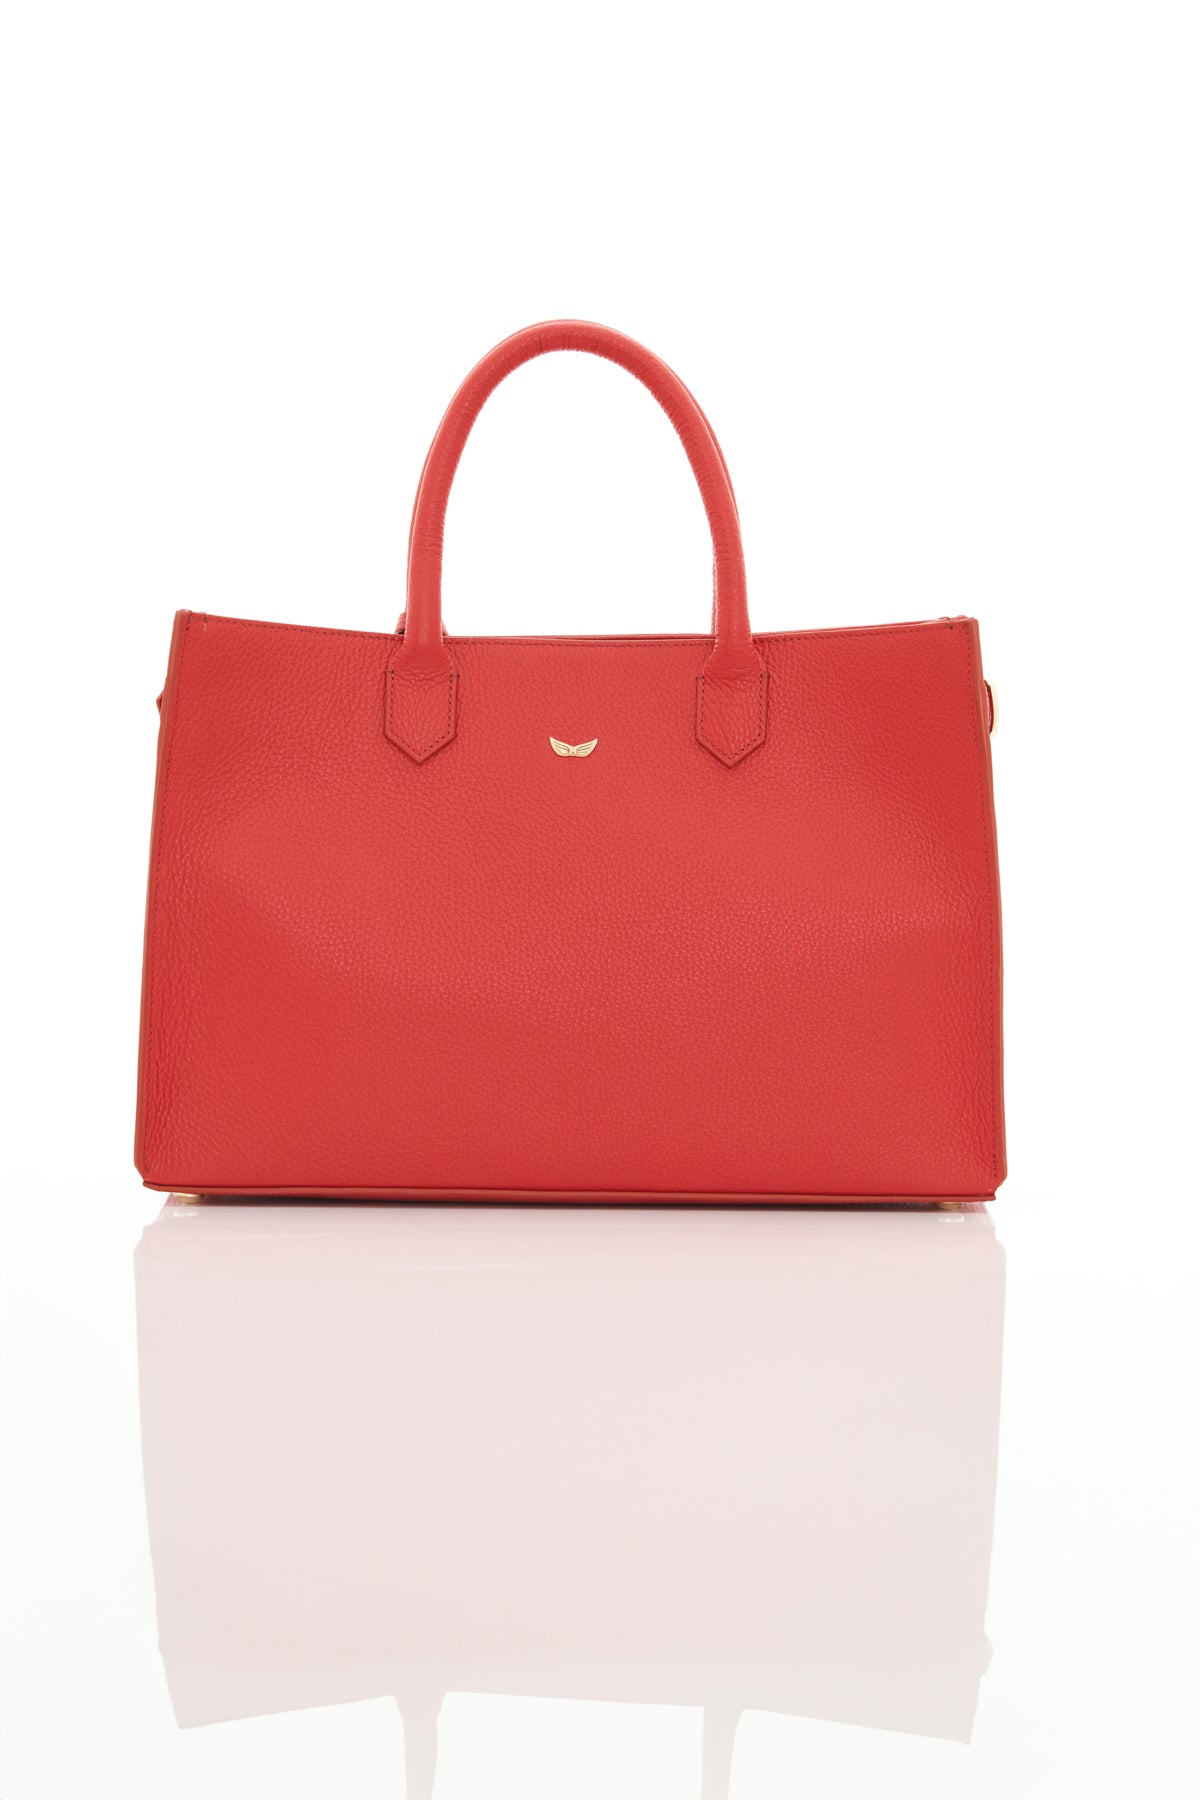 red michael genuine leather women's tote bag back